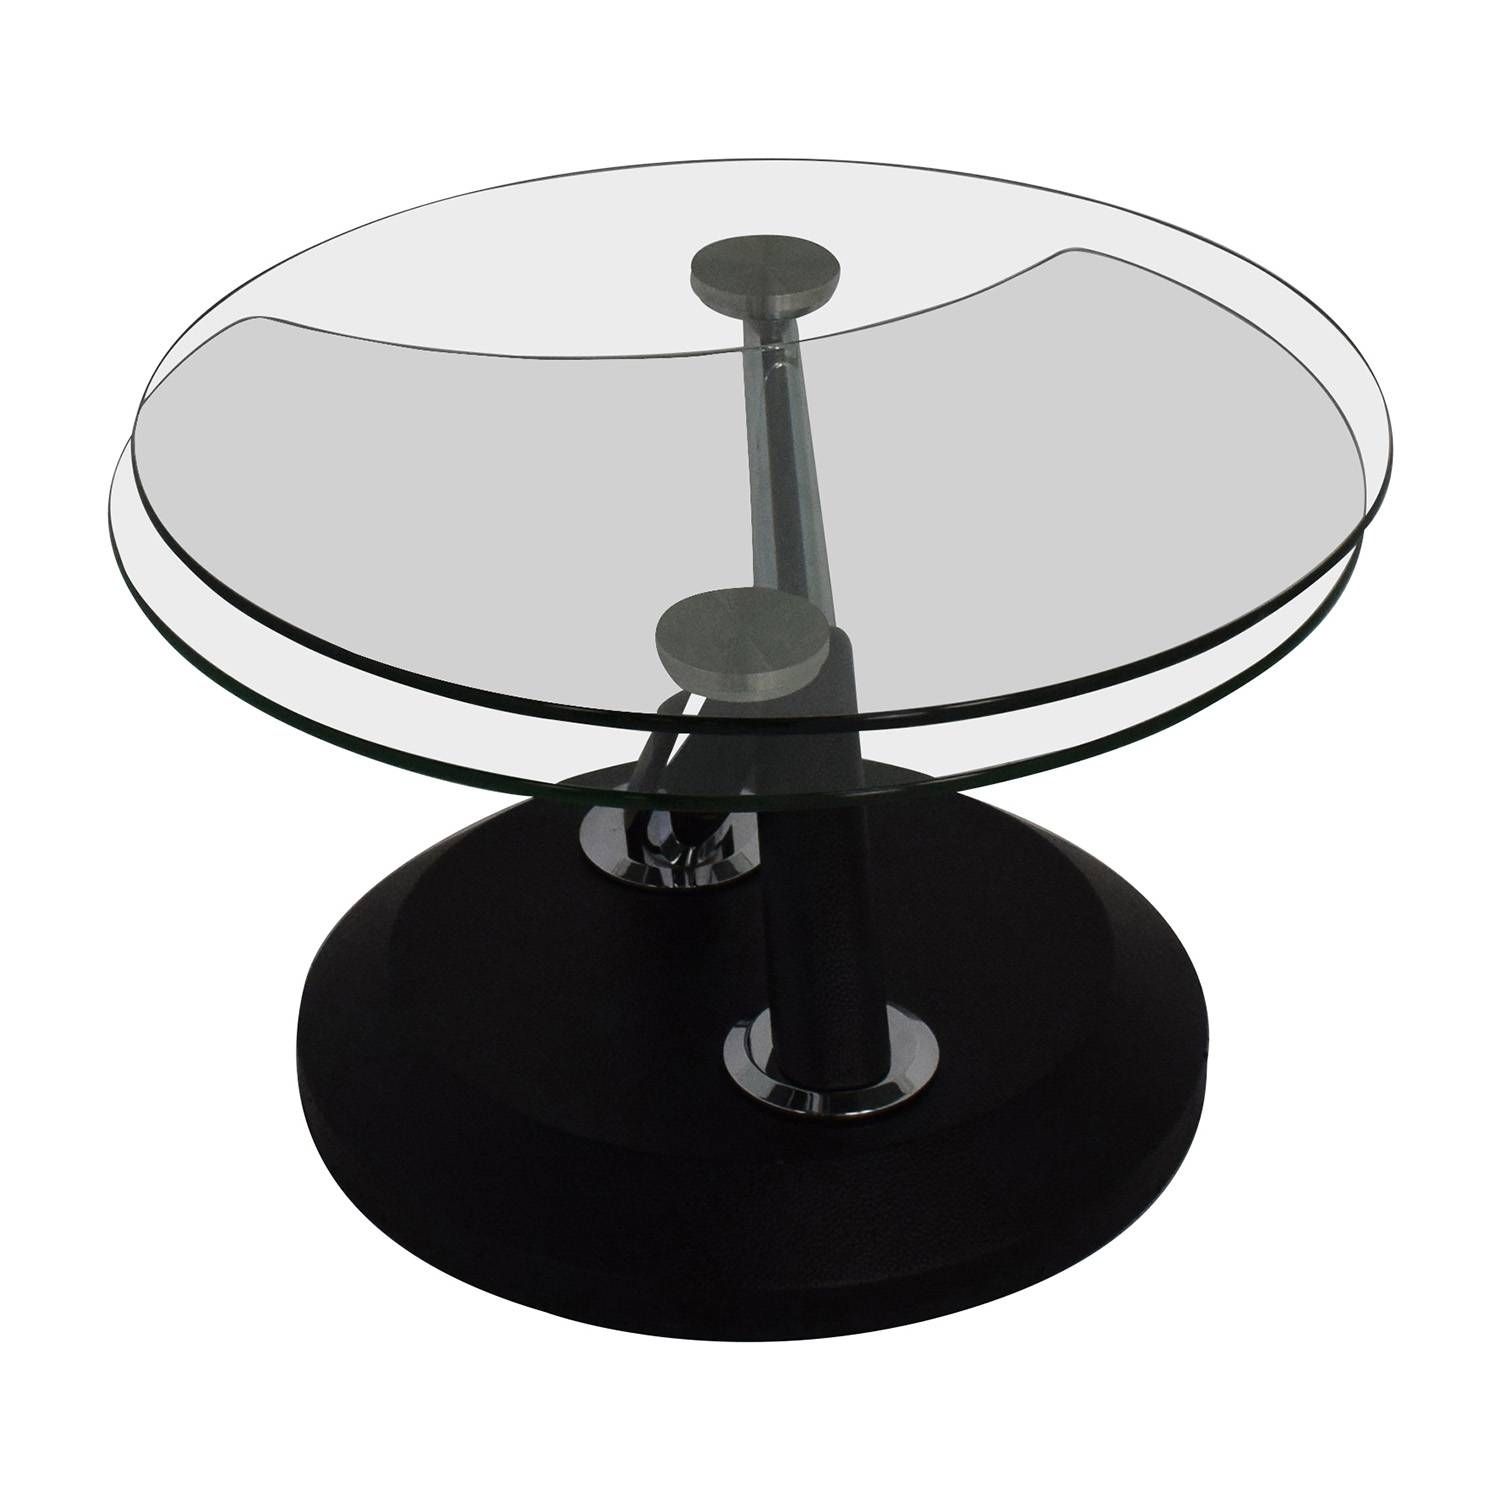 Modesto Glass Coffee Table | Idi Design Intended For Revolving Glass Coffee Tables (View 27 of 30)